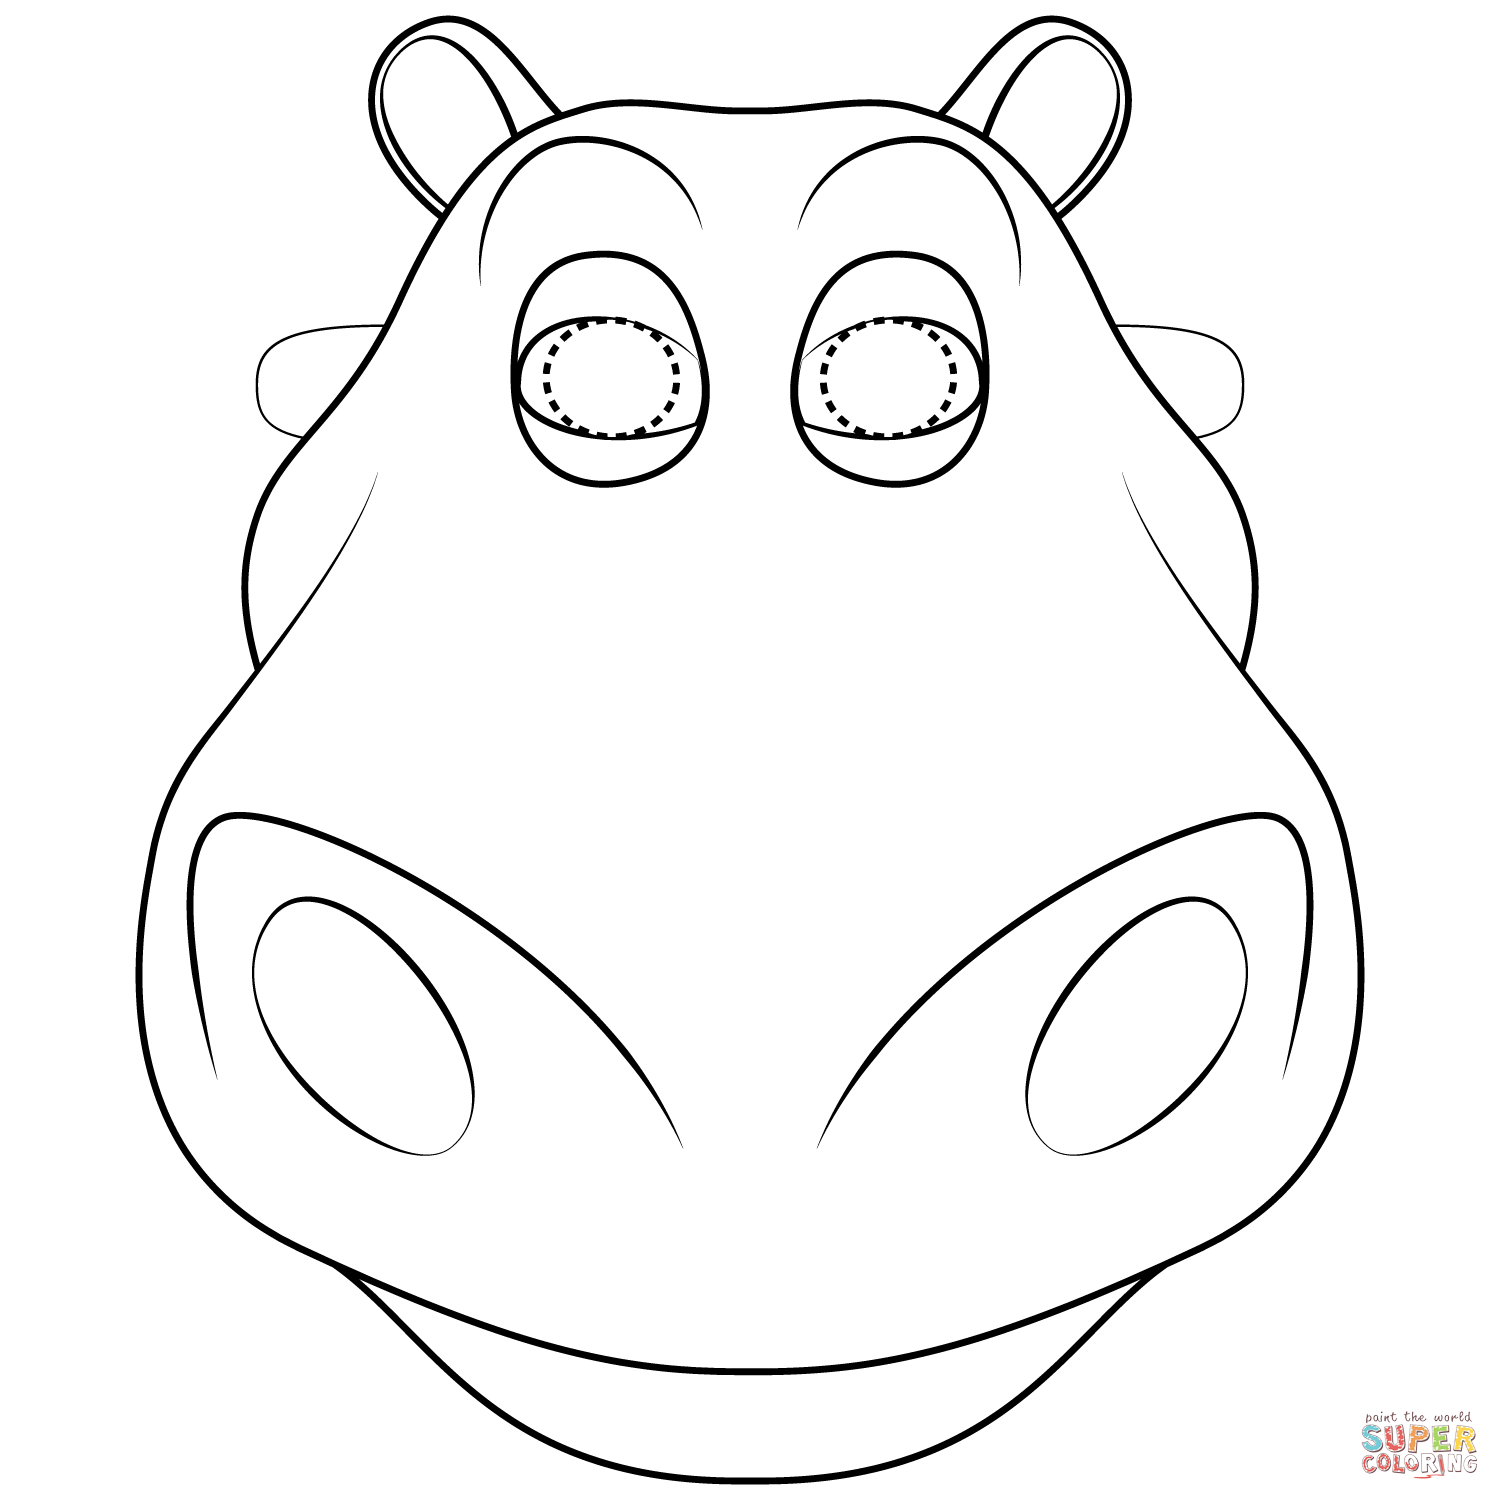 Hippo Mask Coloring Page | Free Printable Coloring Pages - Free Printable Hippo Mask